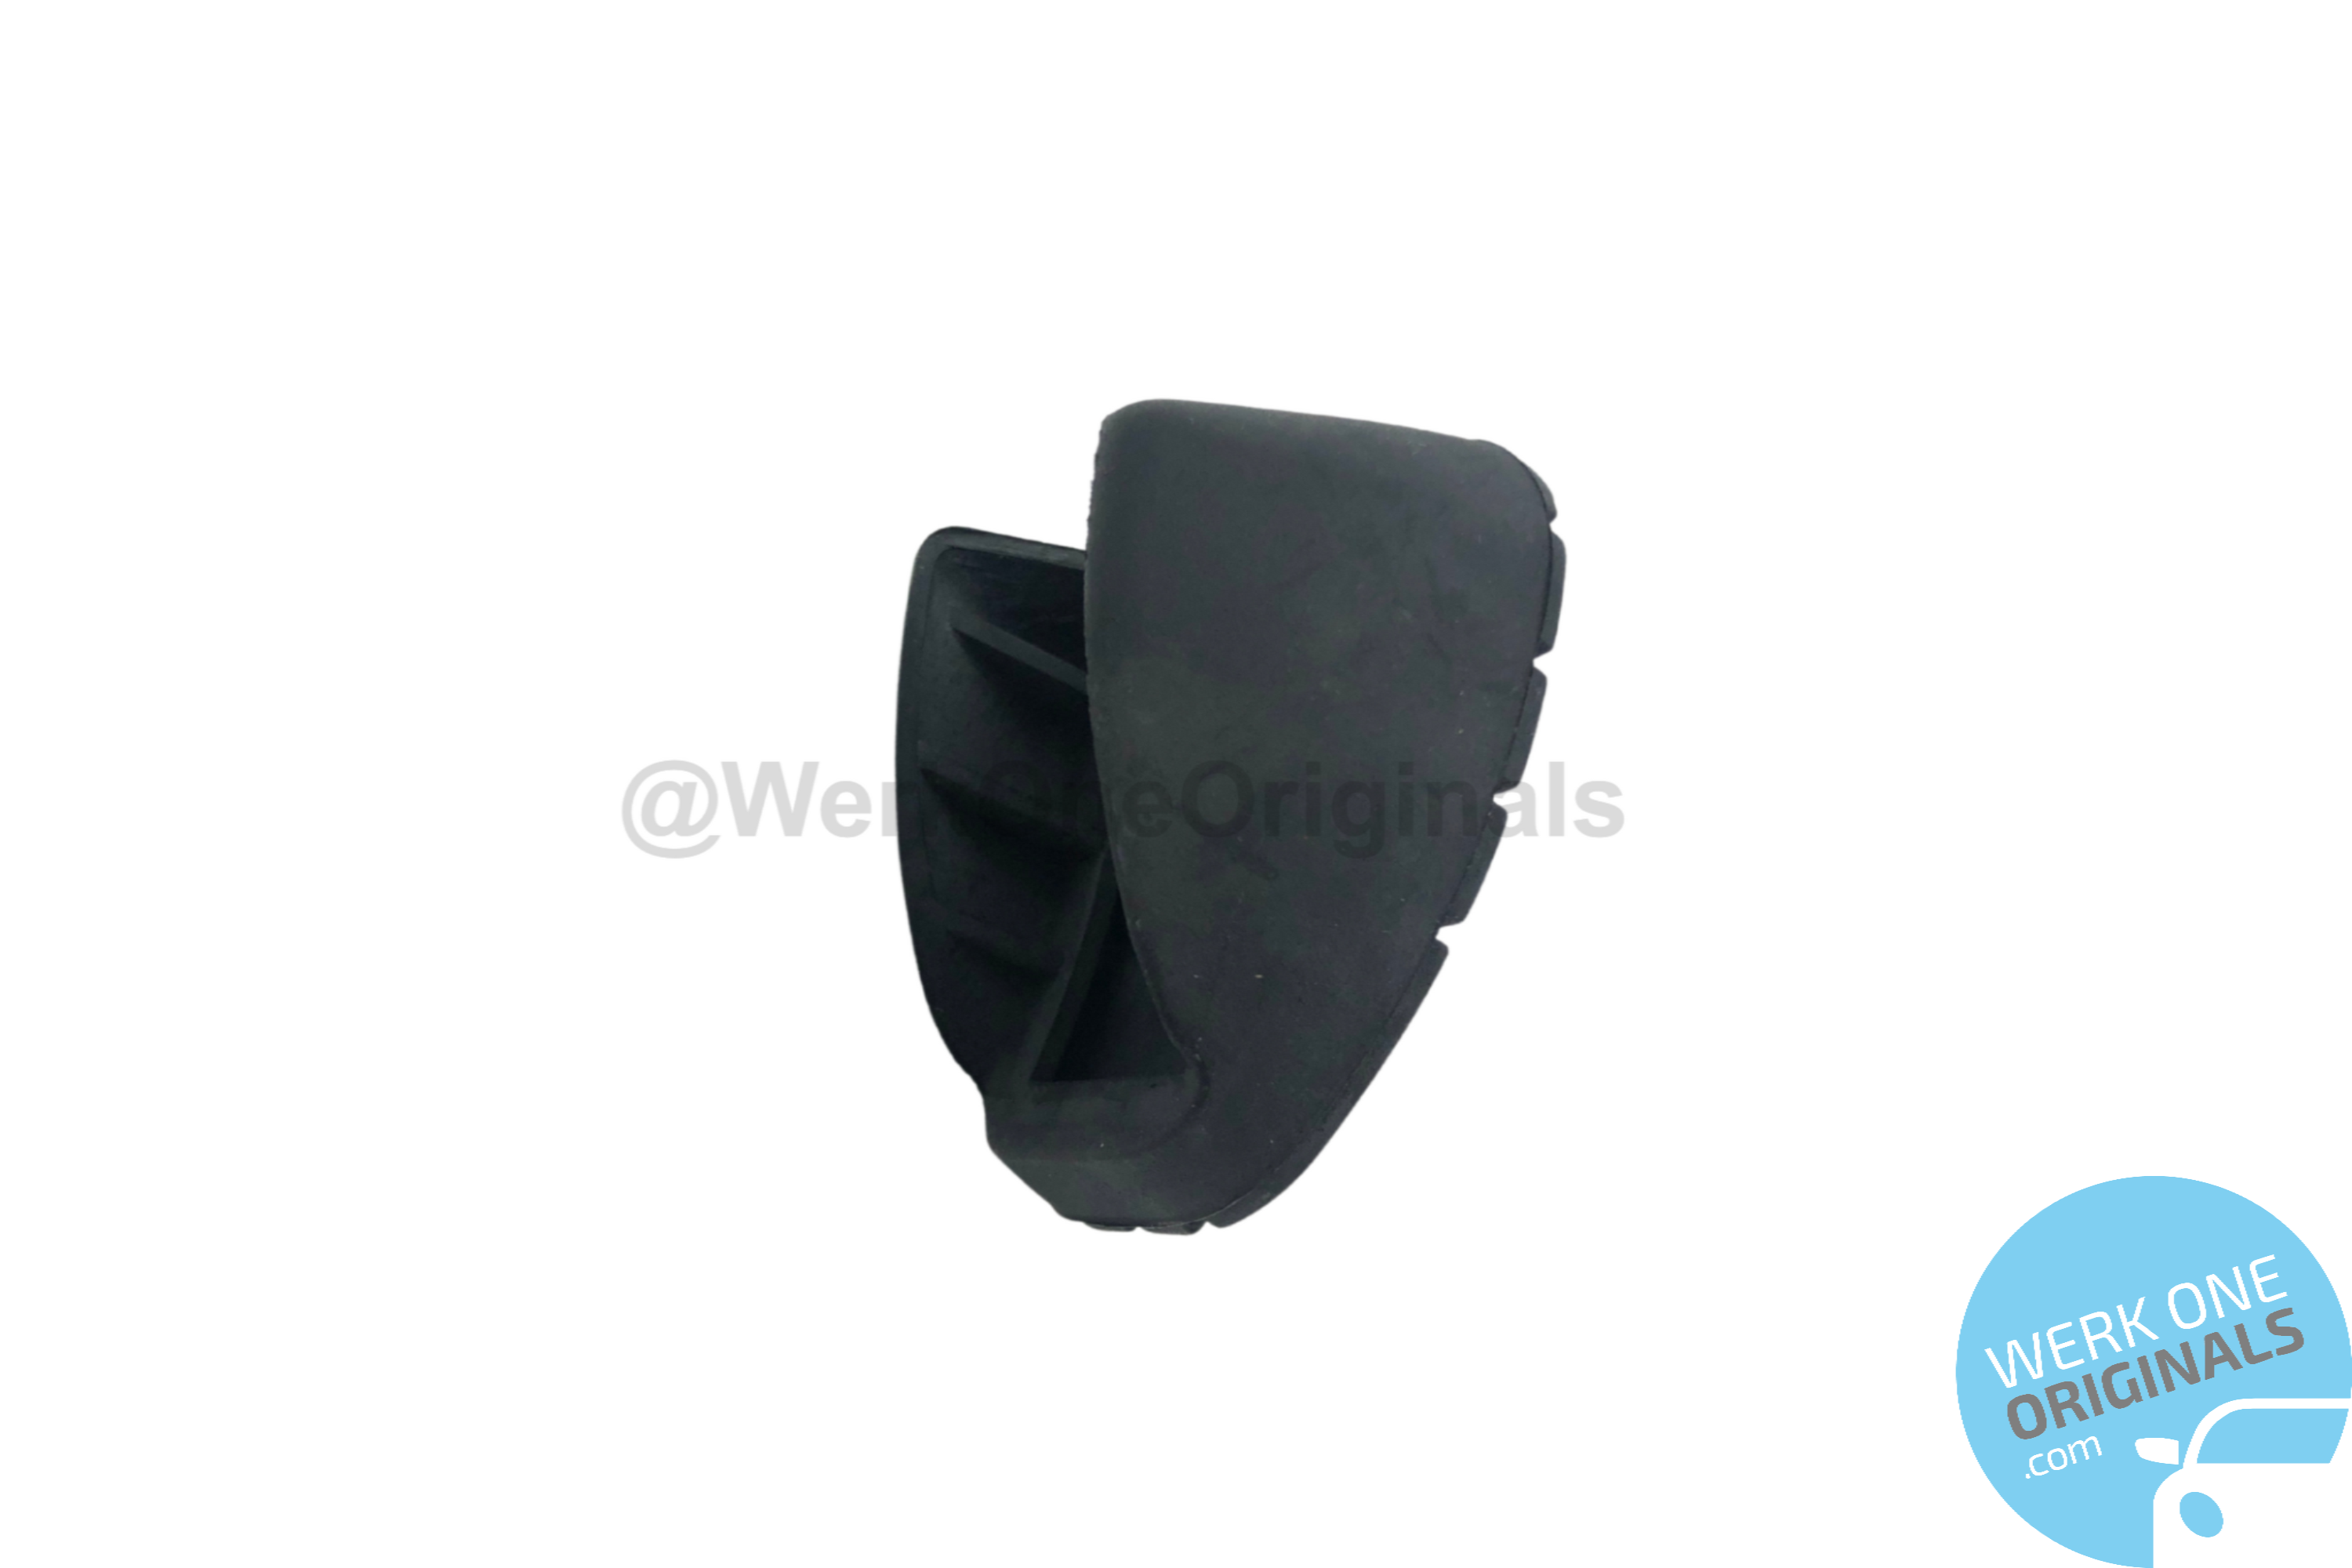 Porsche Replacement Brake & Clutch Pedal Caps for Boxster Type 986 Models